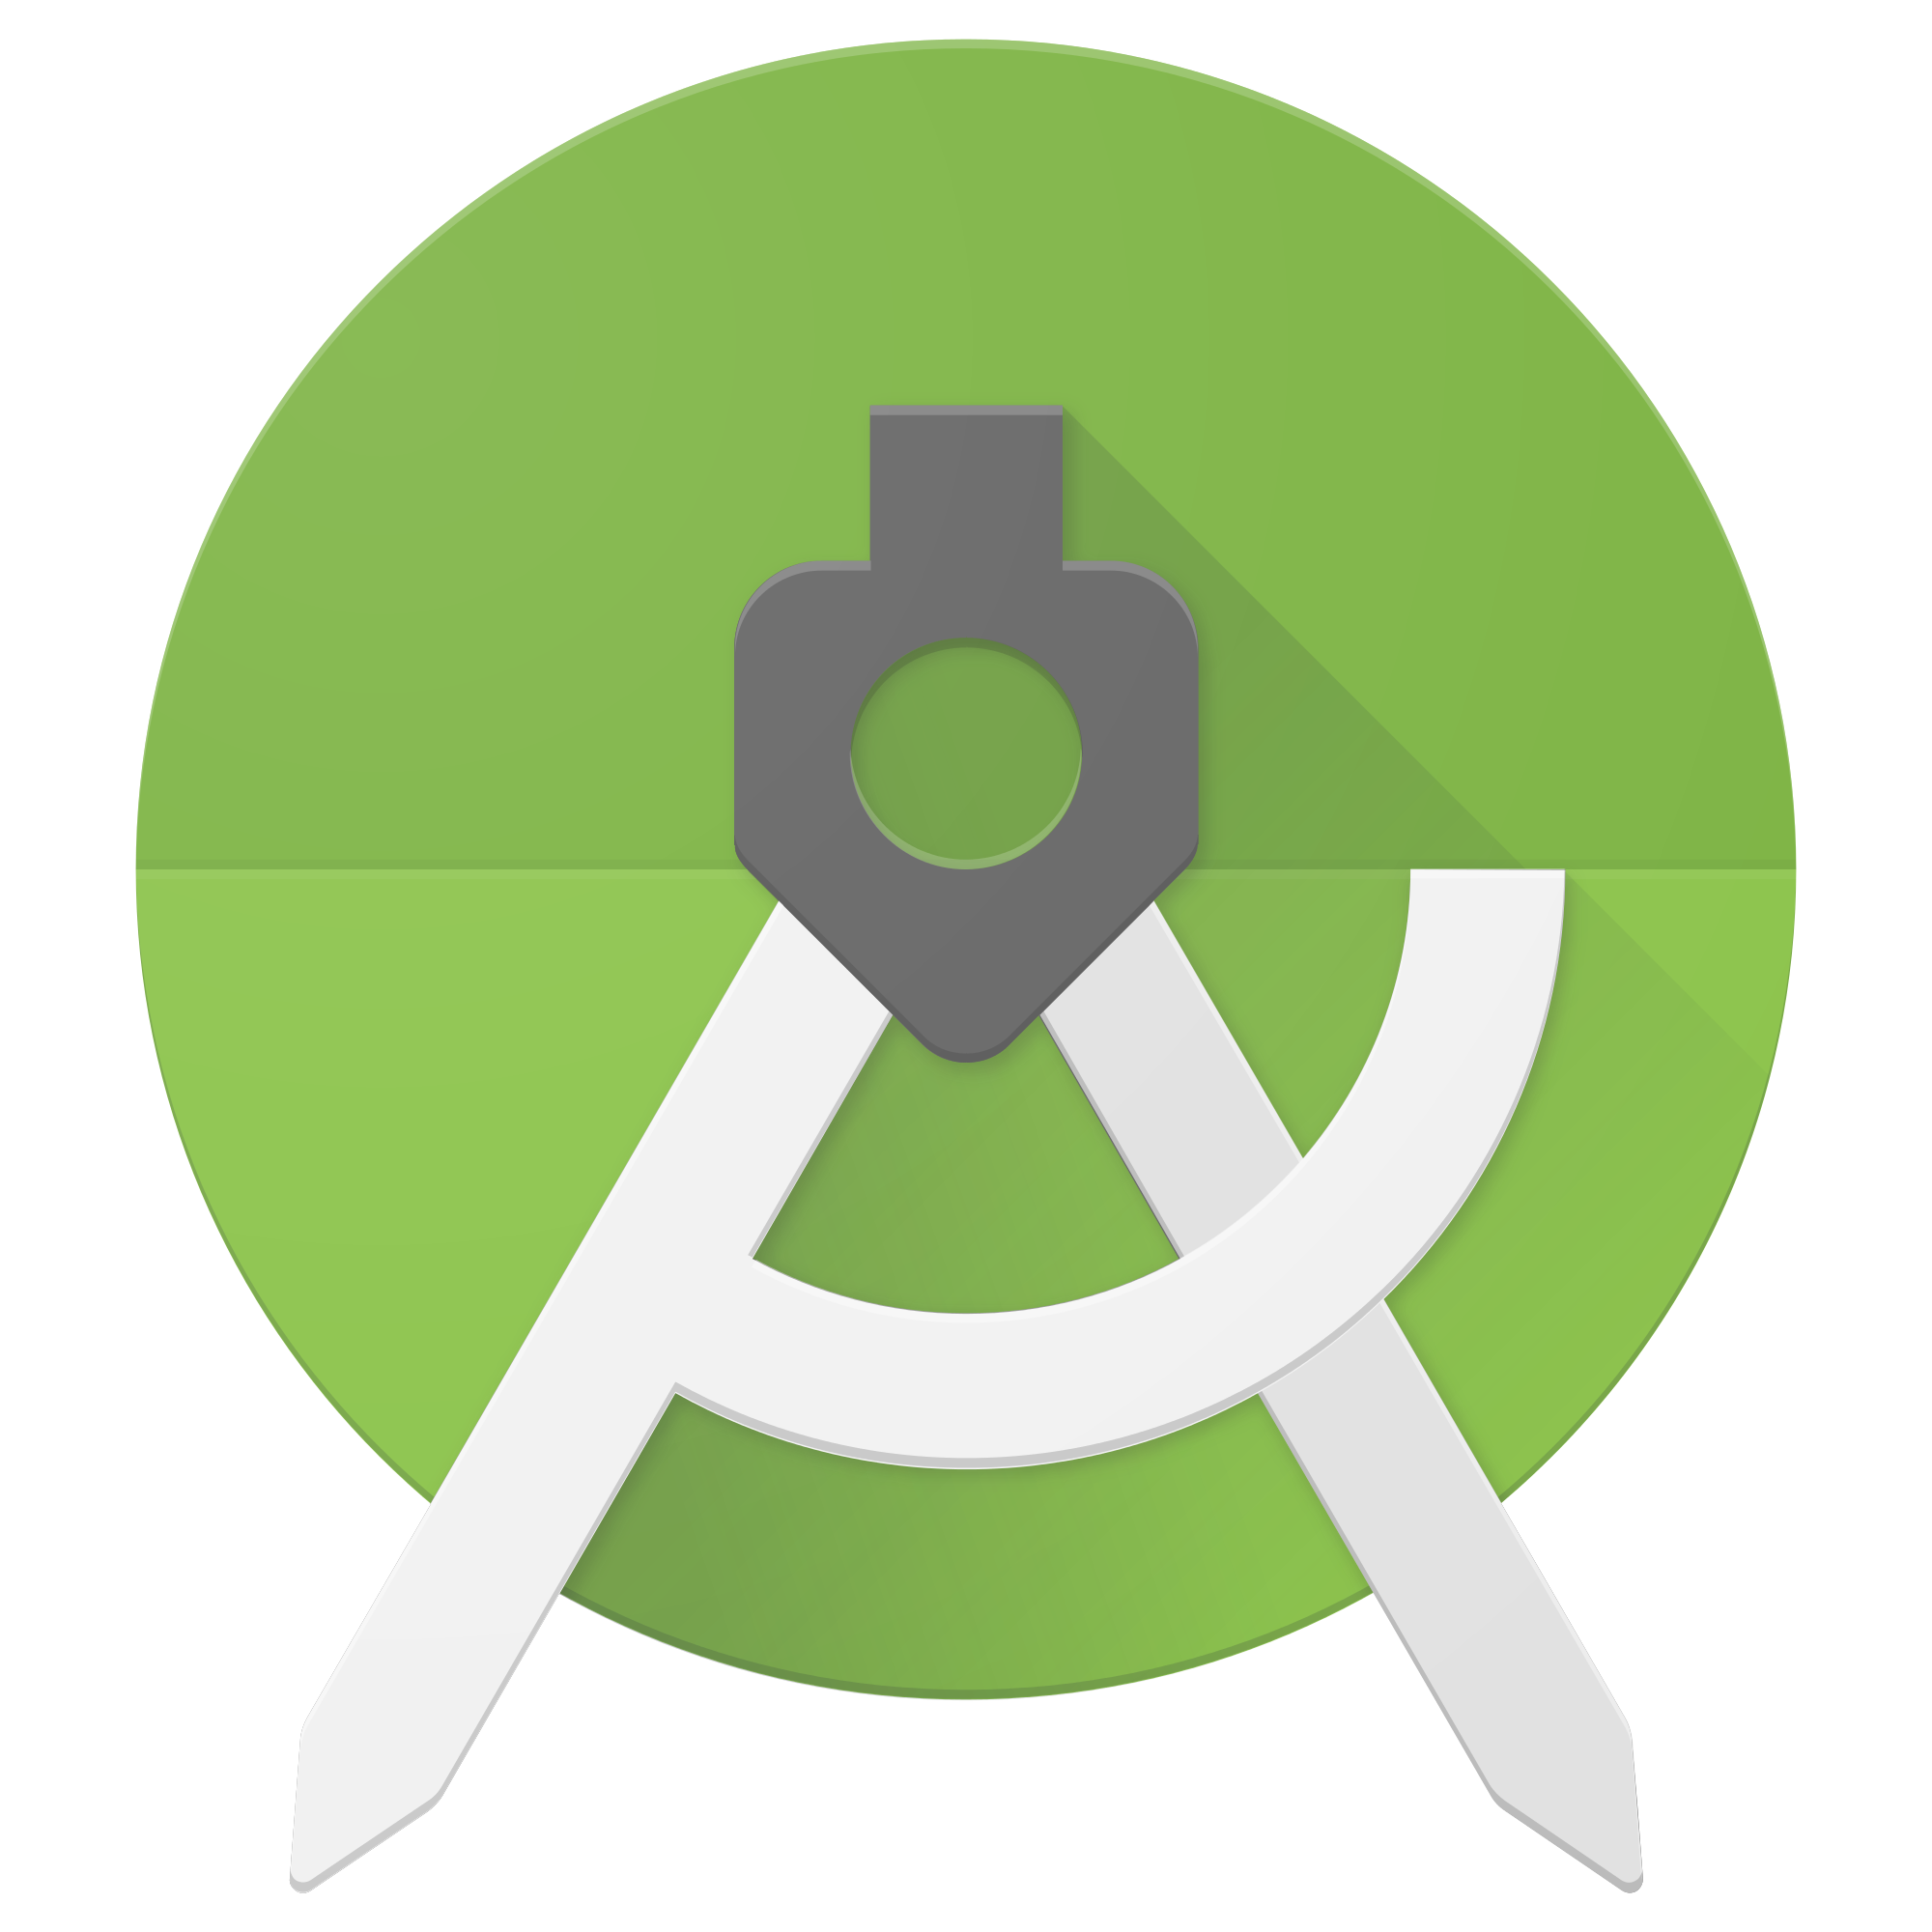 Android Studio 2022.3.1.20 for windows download